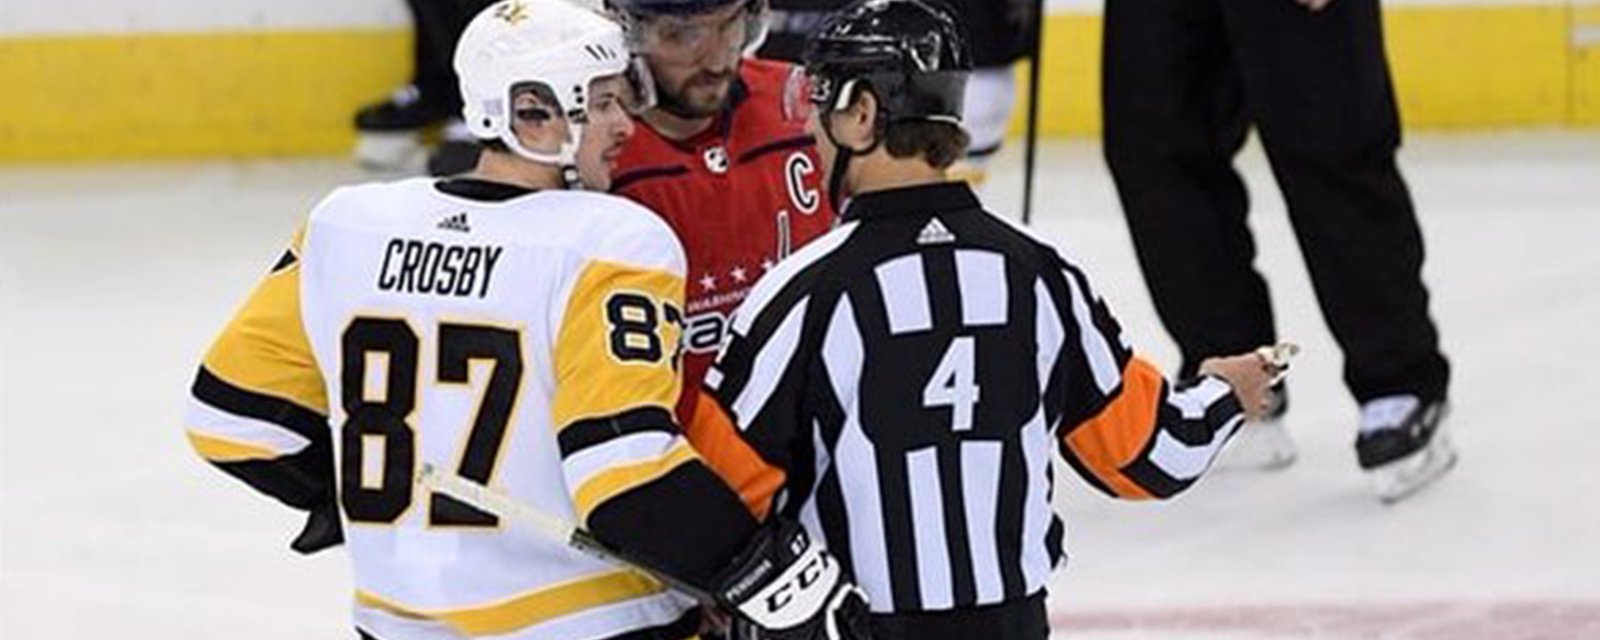 Crosby fires back after backing down from Ovechkin fight